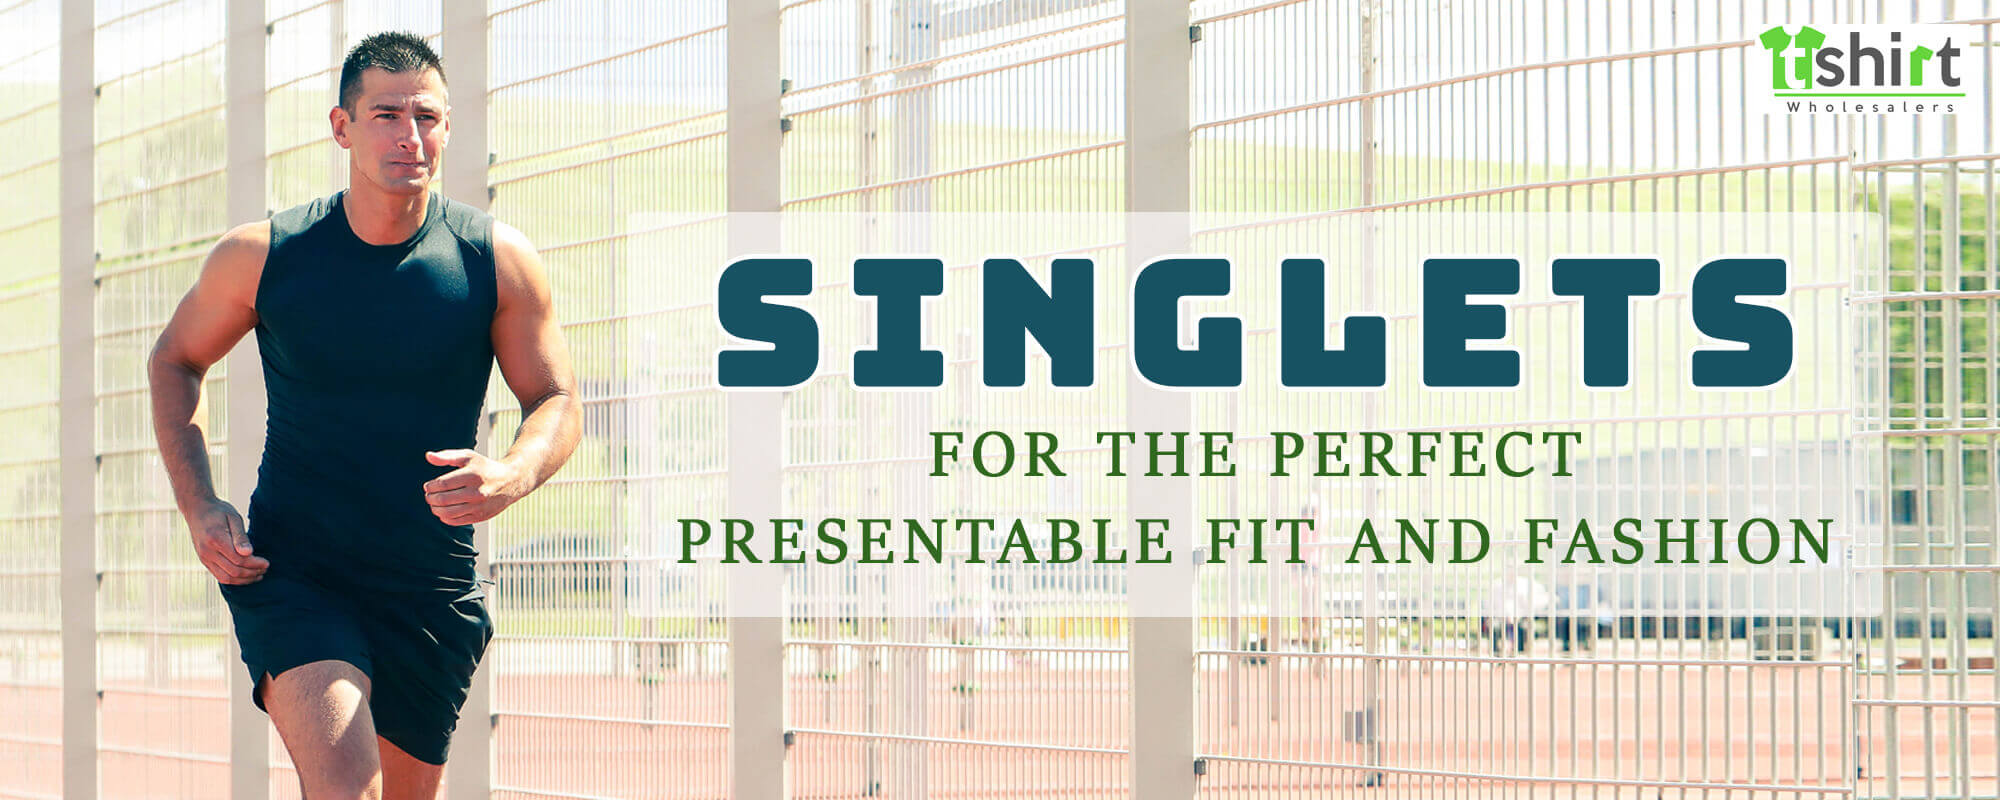 SINGLETS FOR THE PERFECT PRESENTABLE FIT AND FASHION